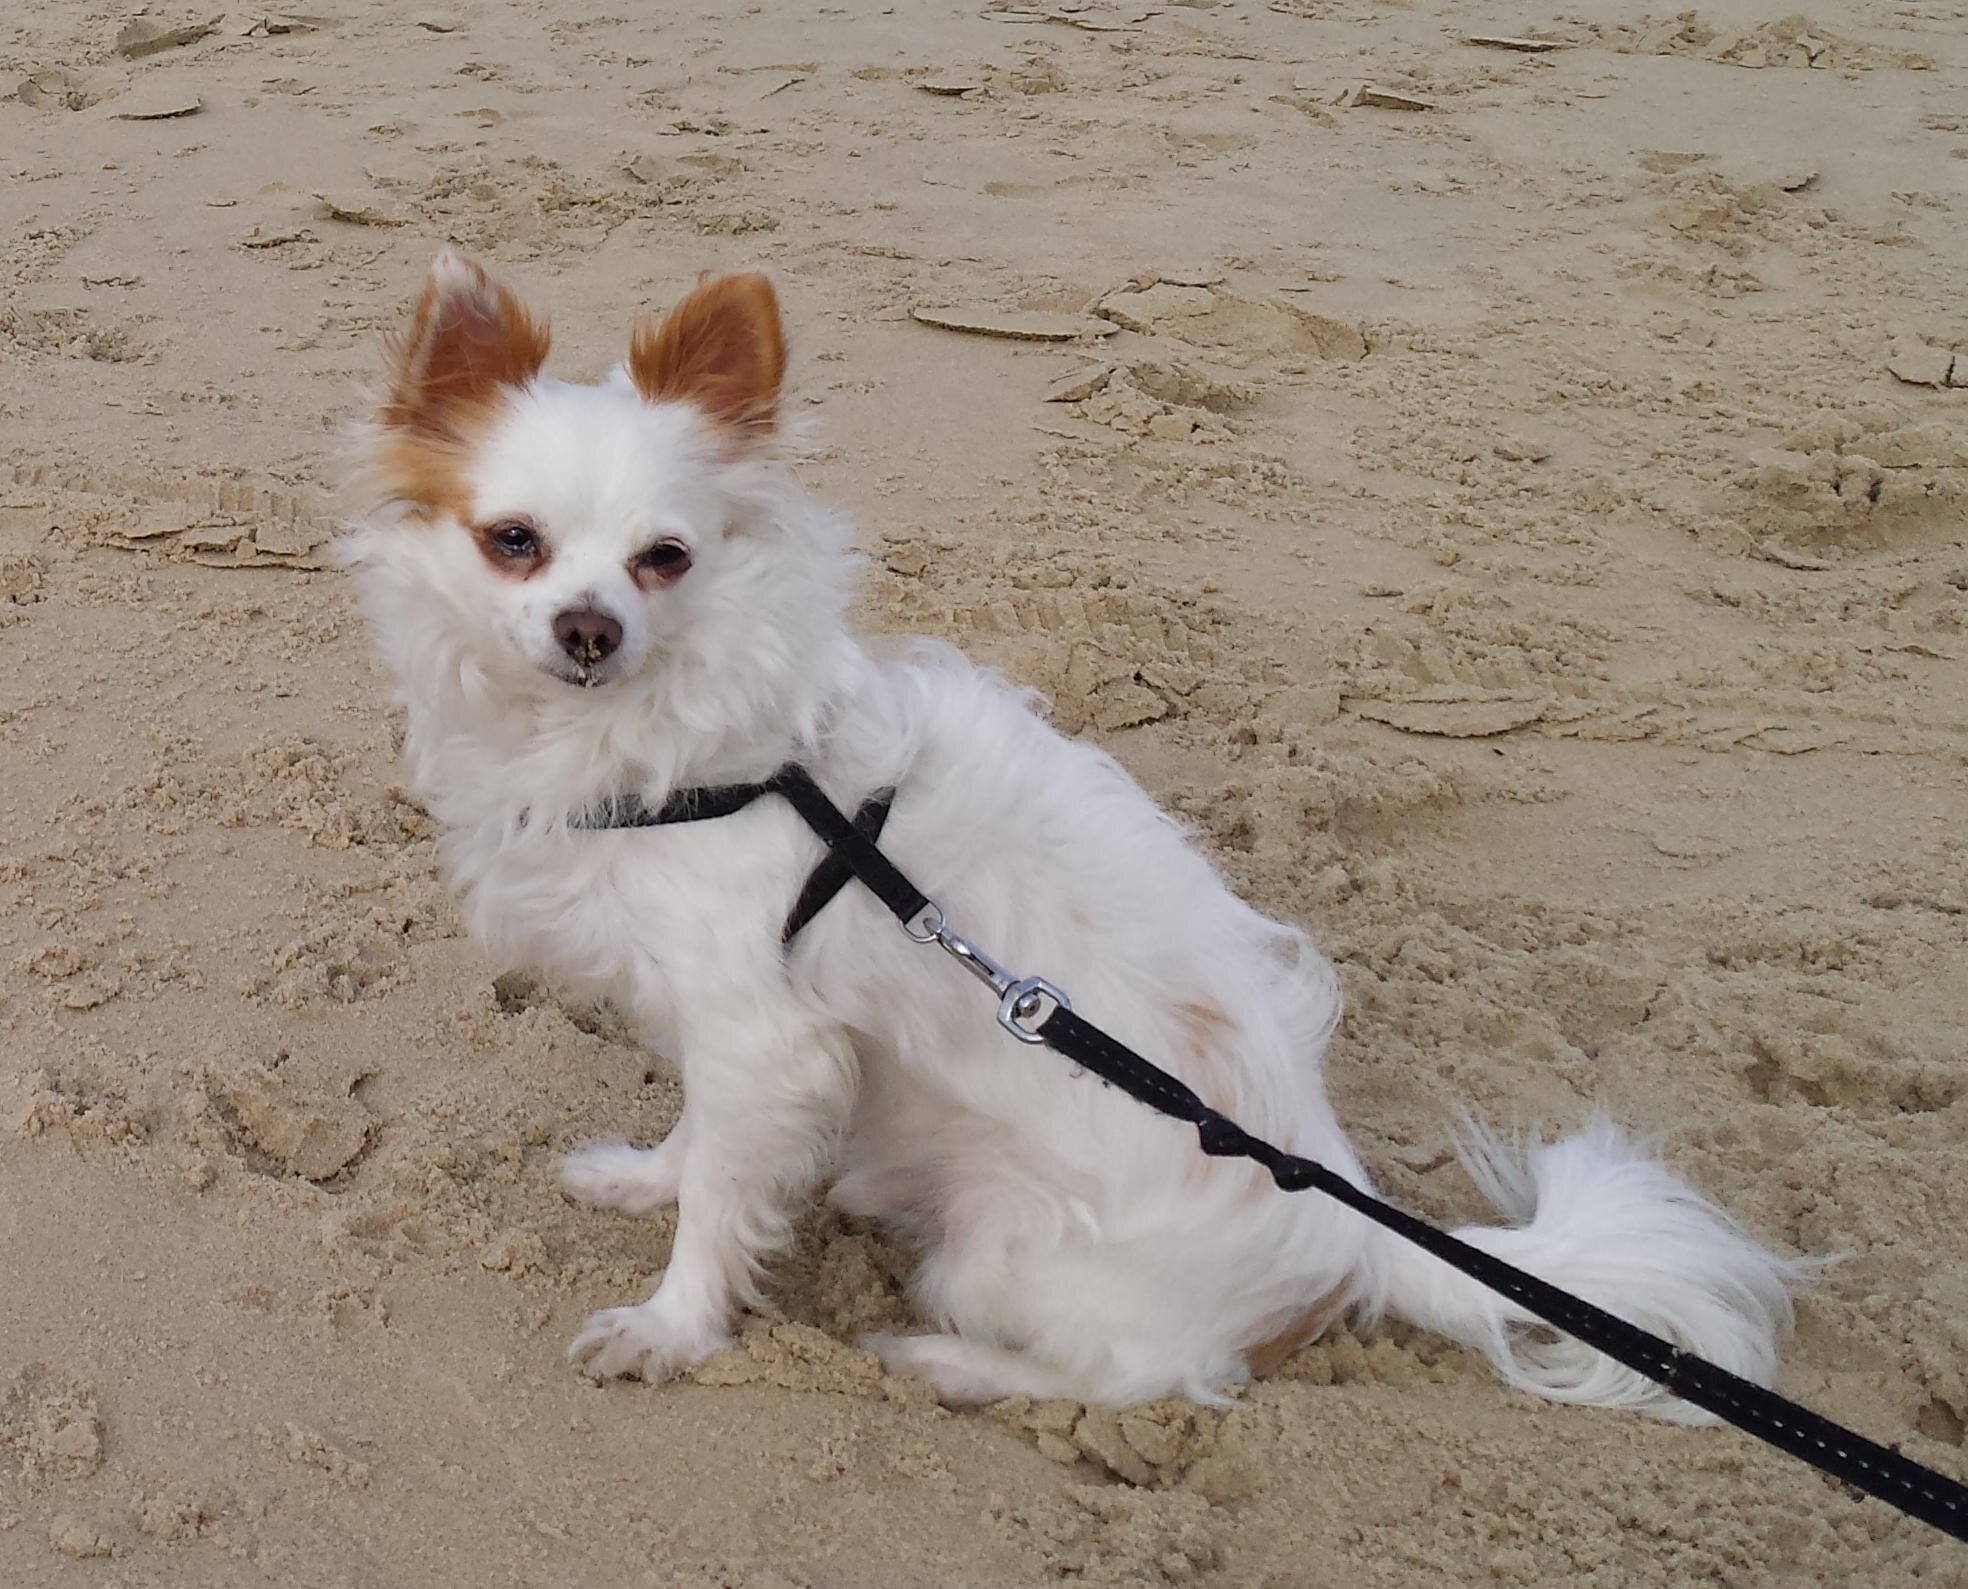 White longhair male Chihuahua. Now 5 jears old from Germany. Missed in Paris, Athis-Mons since 02.11.2013
Our Caravan was stolen and Bazi was inside.